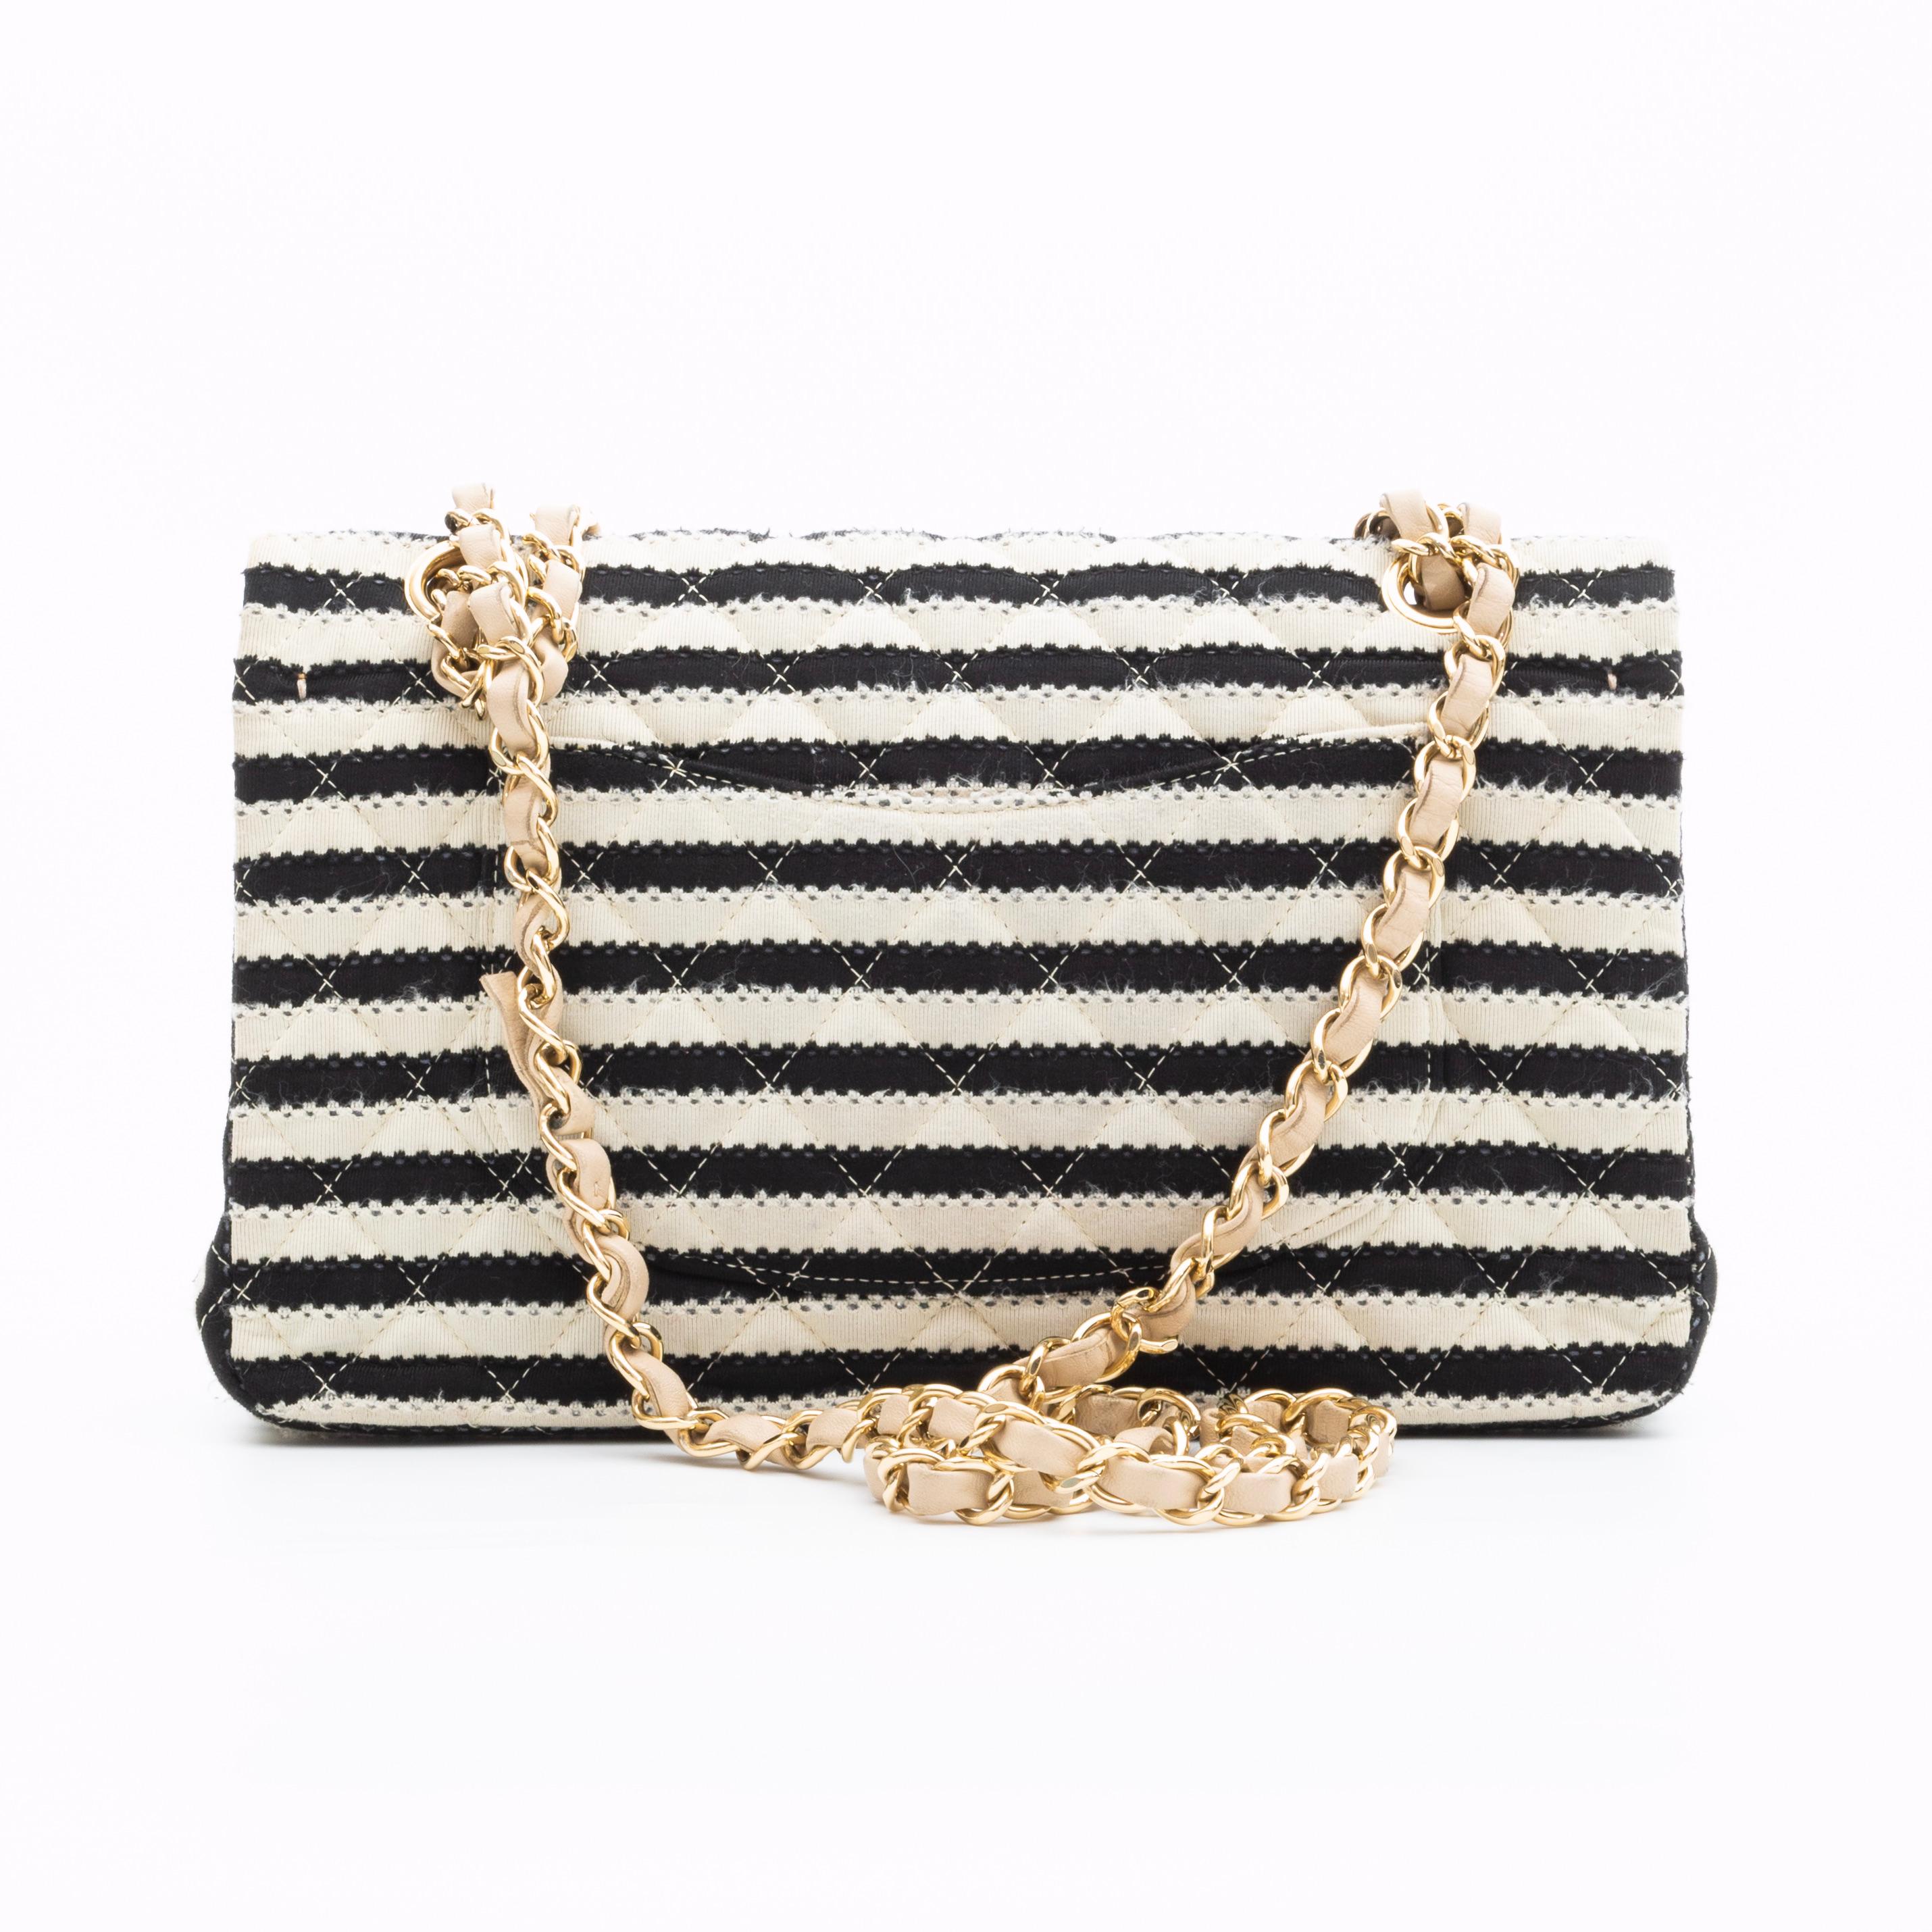 This limited edition Chanel Coco Sailor double flap bag is made with textured black and white striped cotton knit fabric and features an adjustable light gold chain interlaced with leather shoulder strap and CC turnlock closure. The top opens to a